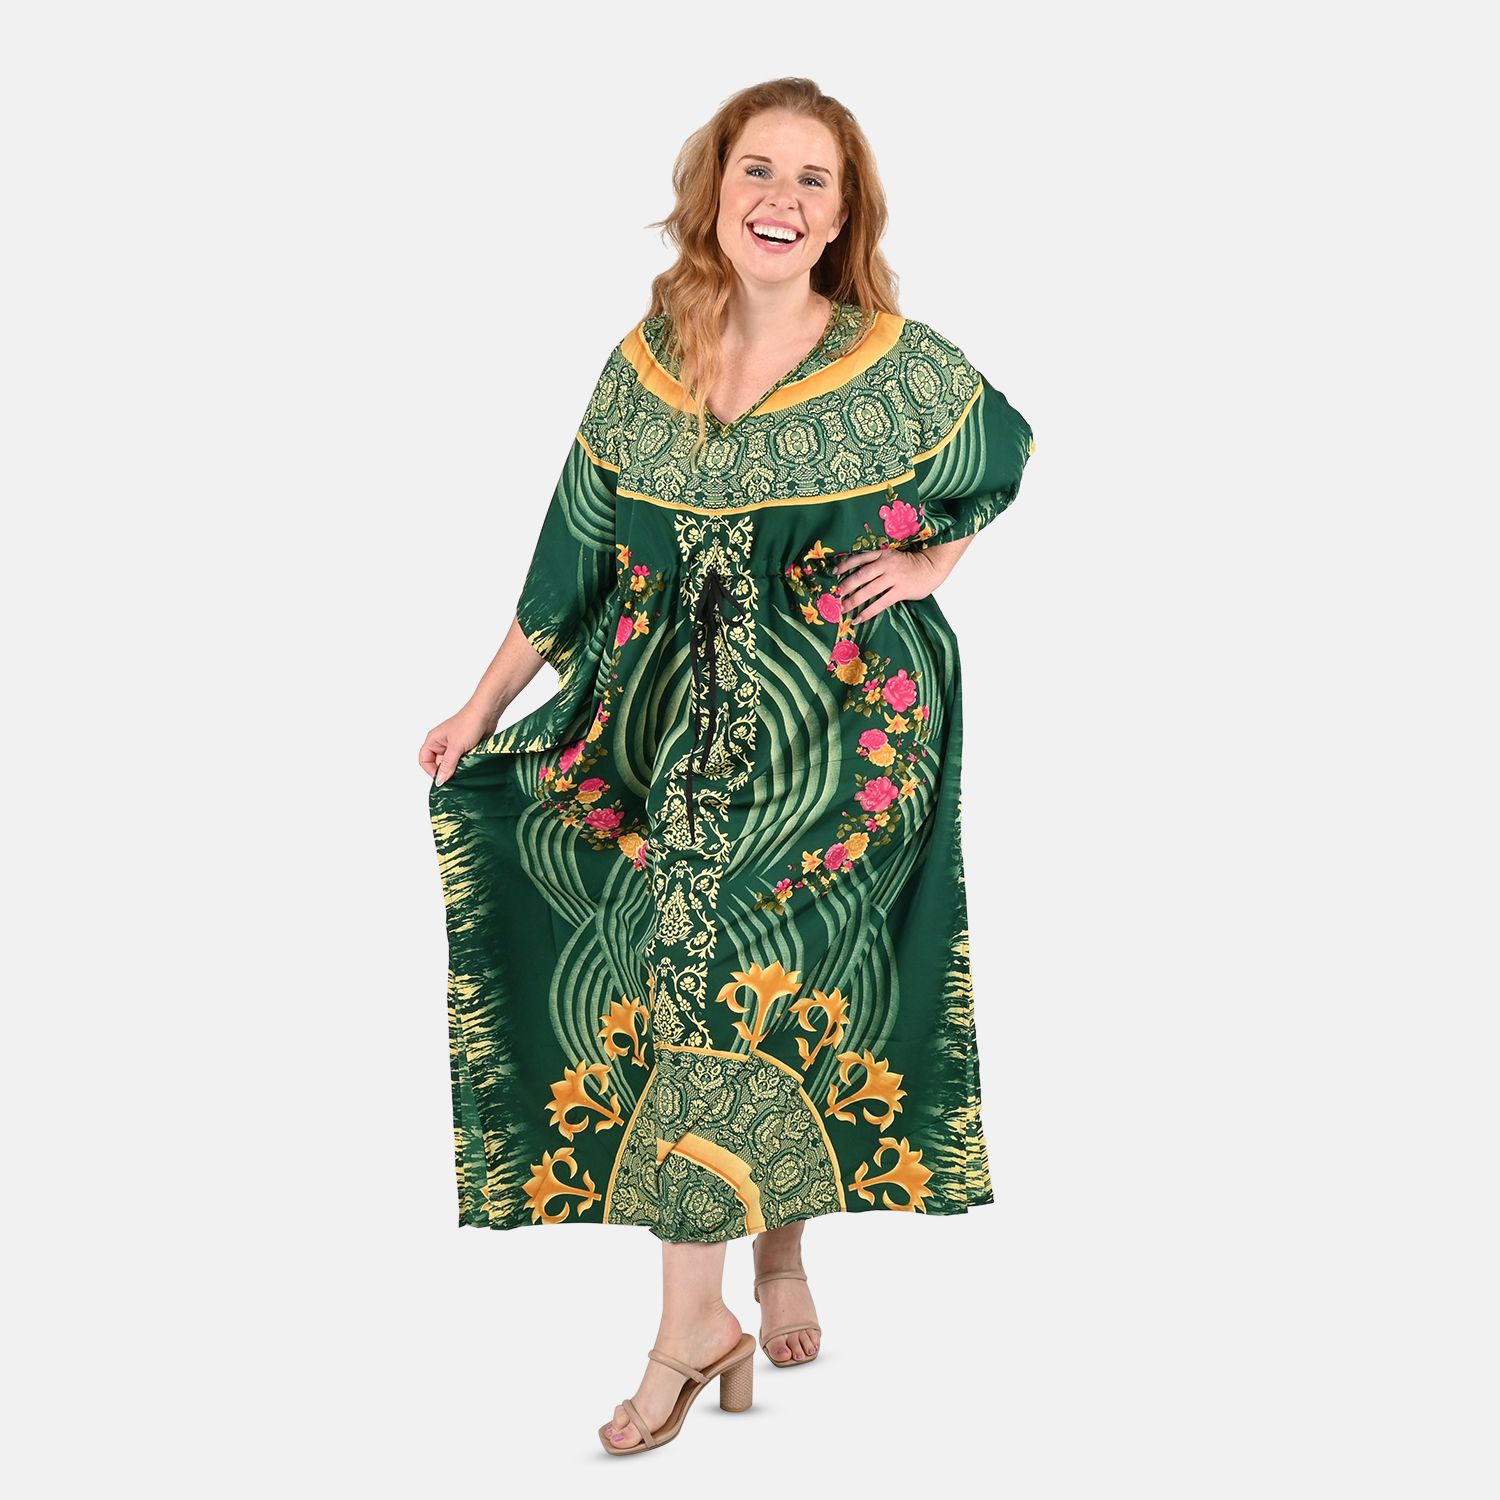 TAMSY Green Ornate Printed Long Kaftan – One Size Fits Most